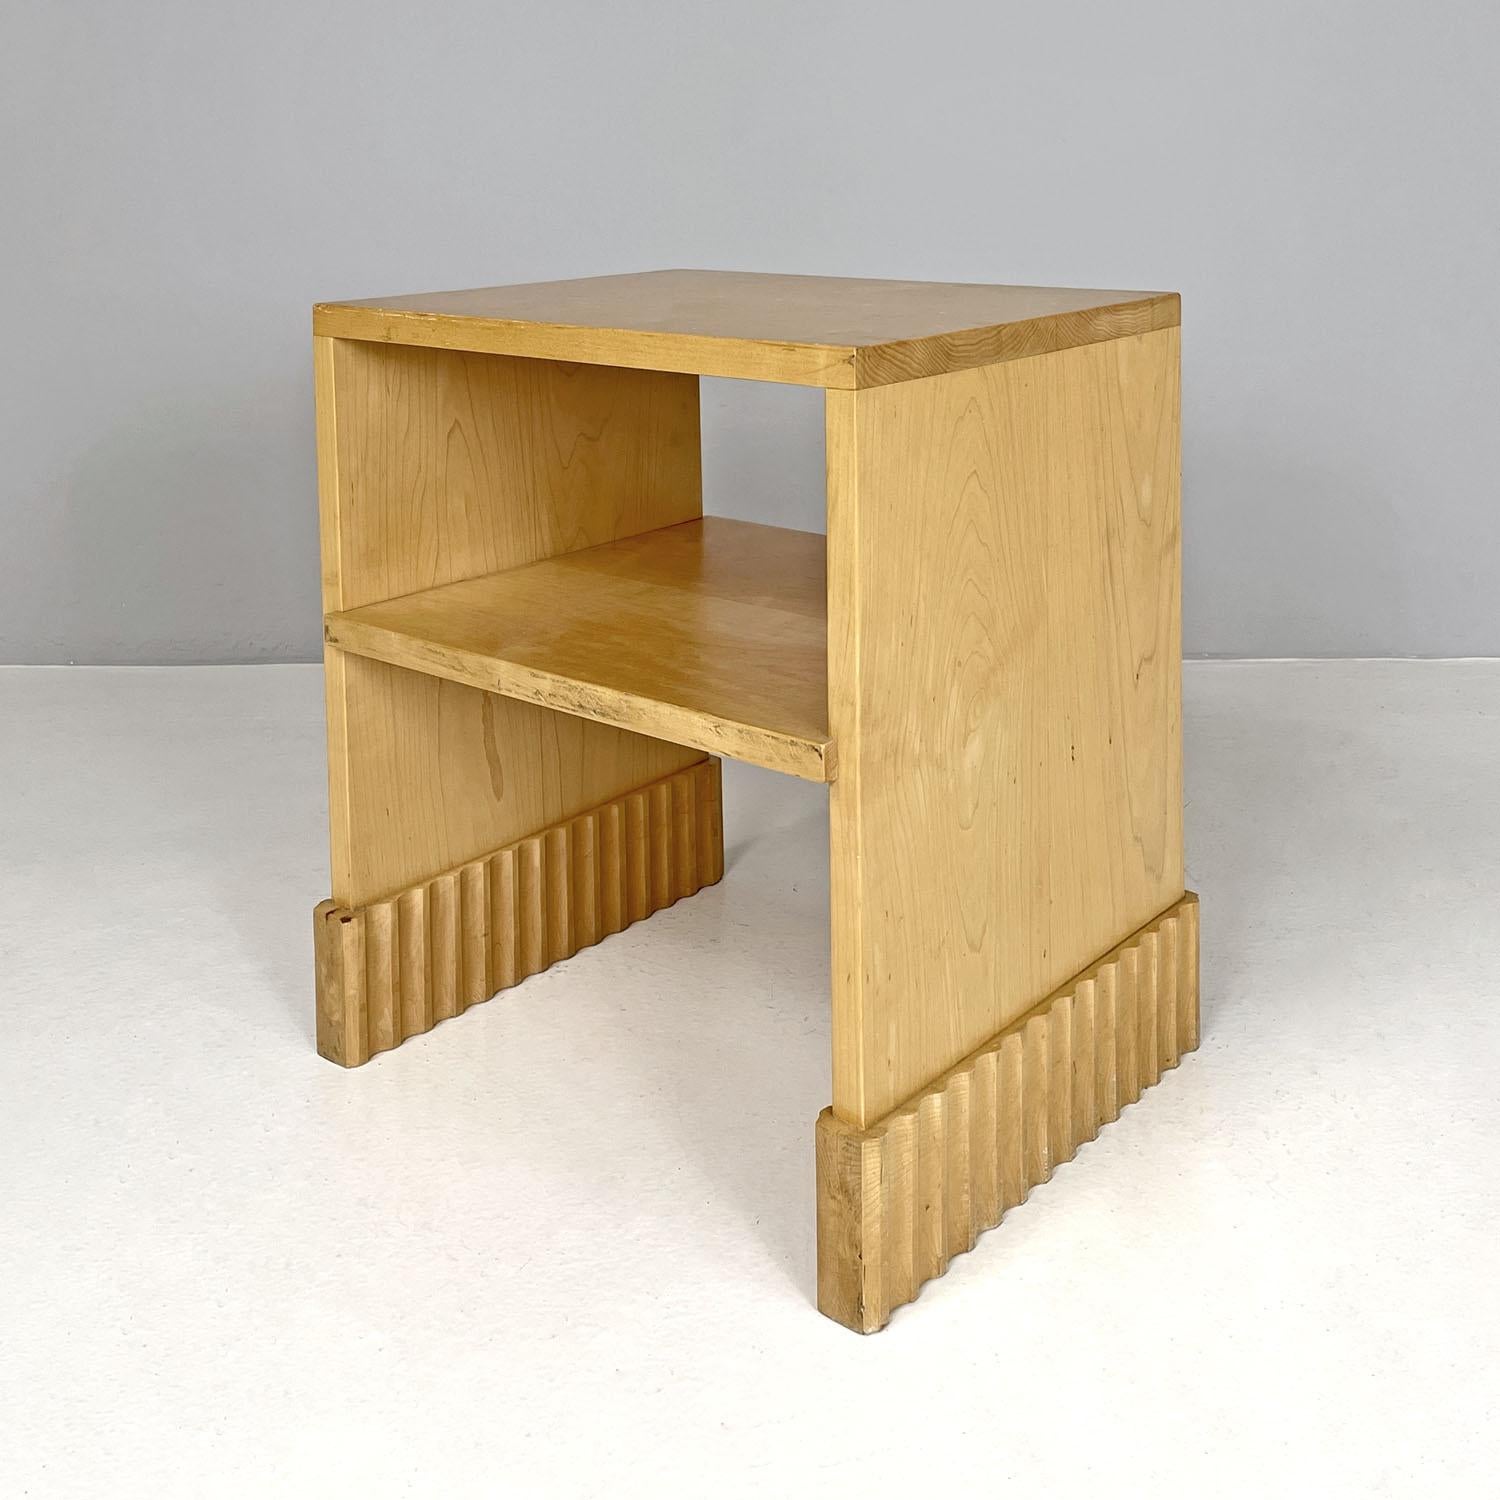 American postmodern rectangular wooden coffee table by AQQ, 1990s
Coffee table with rectangular wooden top. It has a shelf in the central part of the structure. The two legs, of the same length as the top and the structure, end on the ground with a